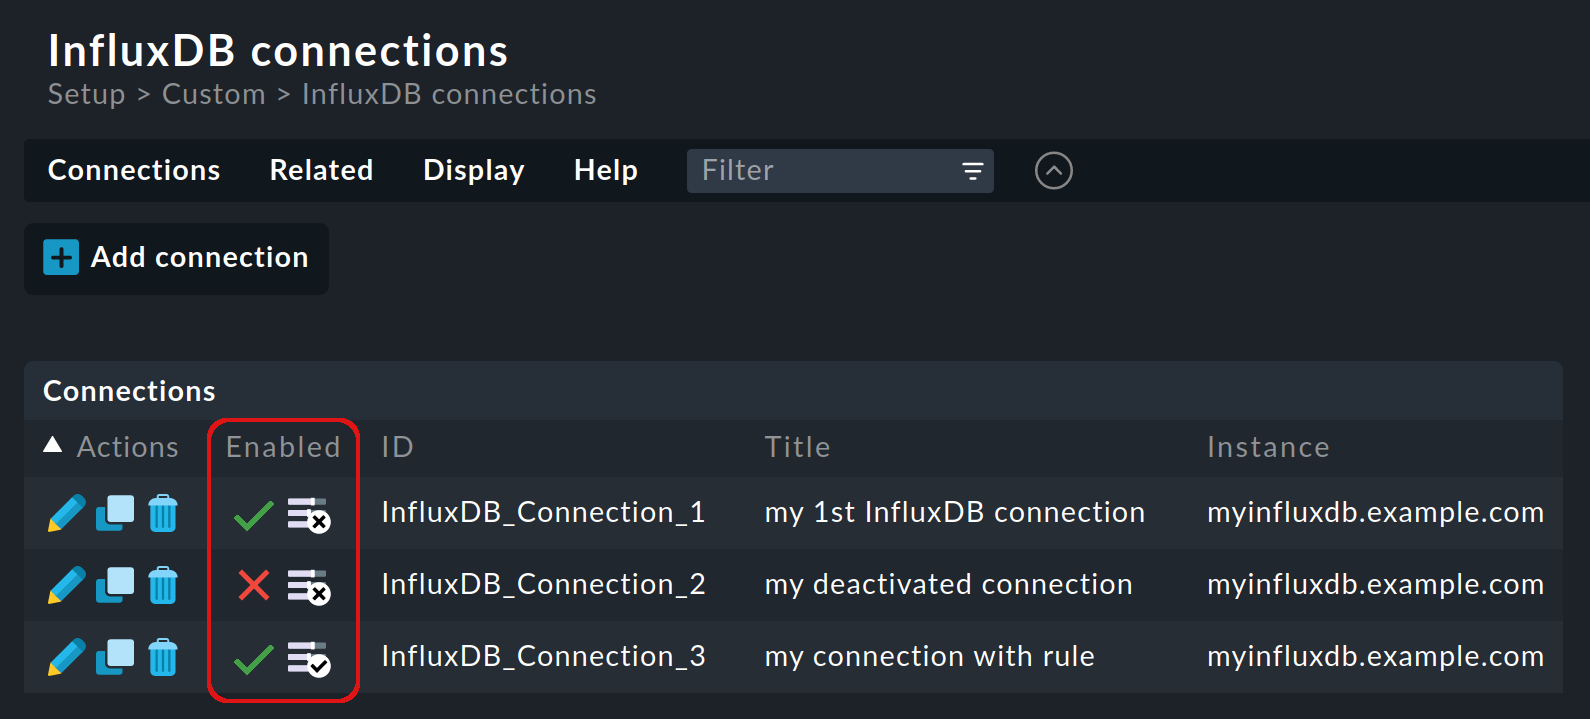 List of InfluxDB connections.